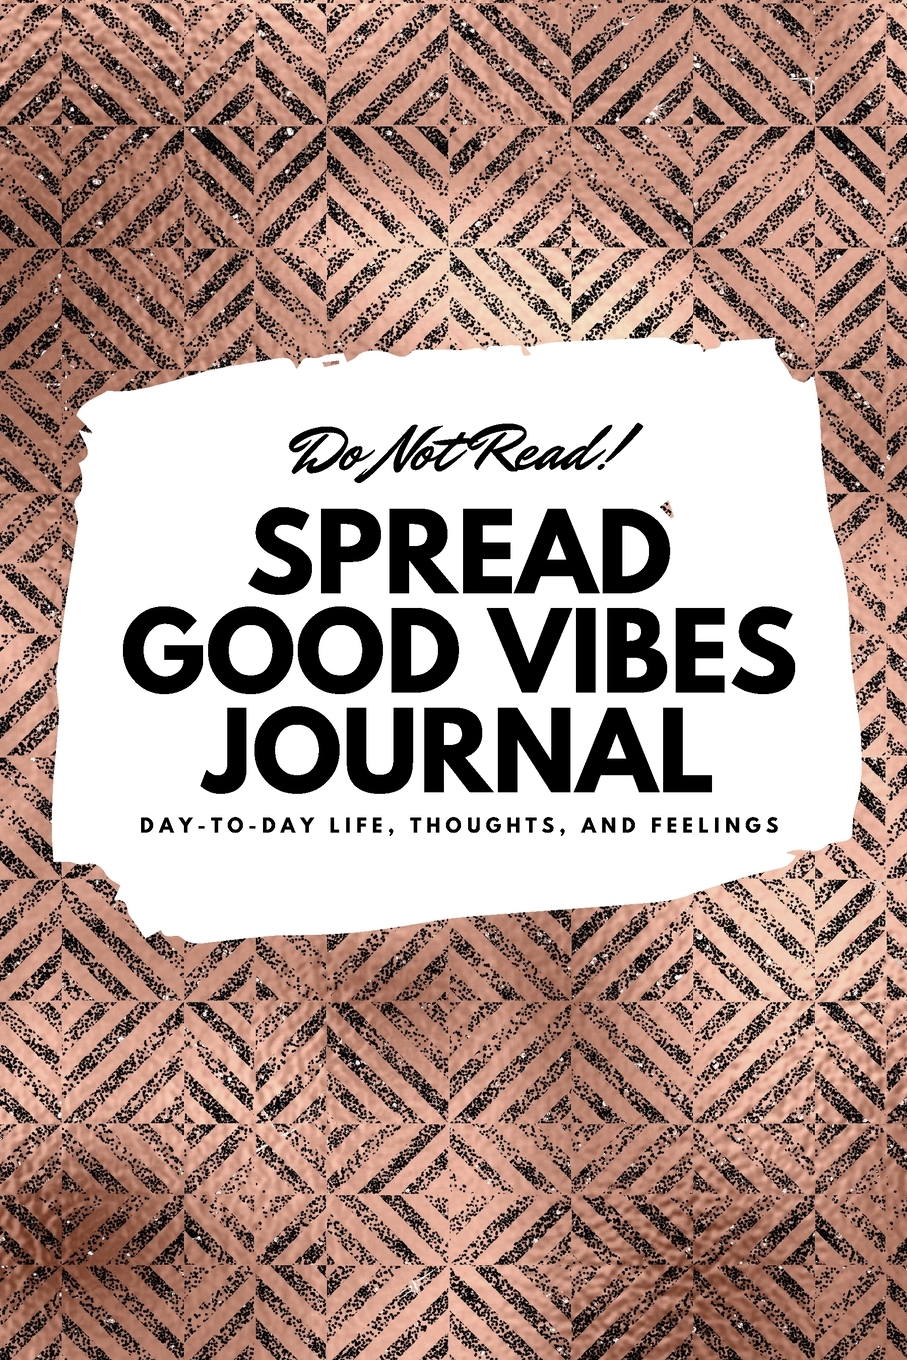 6x9 Blank Journal: Do Not Read! Spread Good Vibes Journal - Small Blank Journal - 6x9 Blank Journal (Softcover Journal / Notebook / Sketchbook / Diary) (Series #49) (Paperback) - image 1 of 1